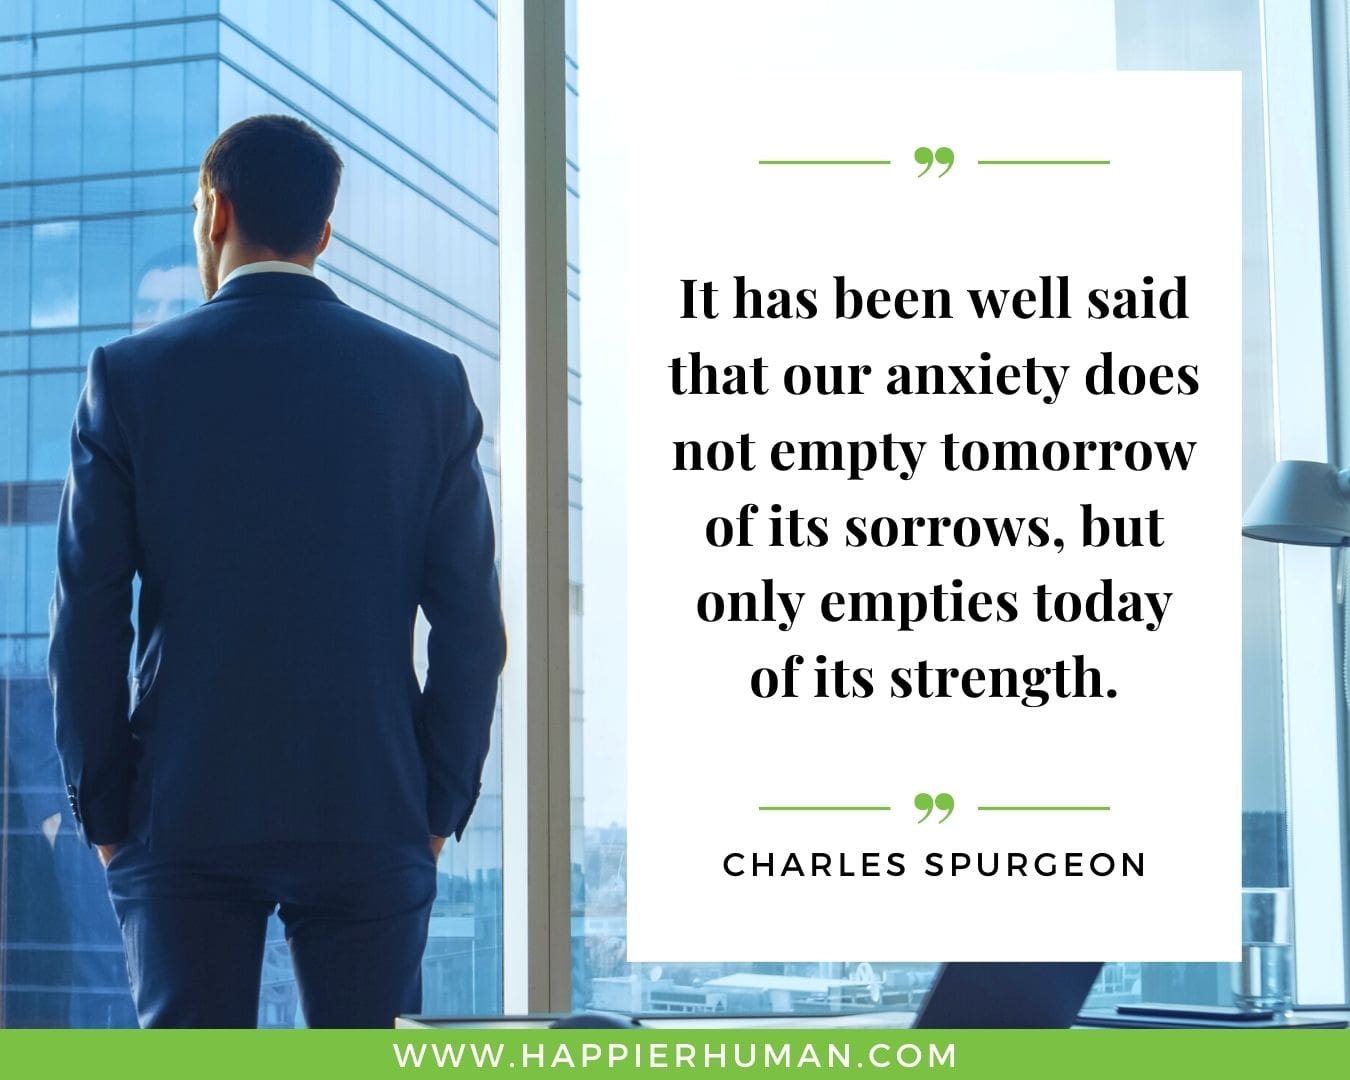 Overthinking Quotes - "It has been well said that our anxiety does not empty tomorrow of its sorrows, but only empties today of its strength." - Charles Spurgeon